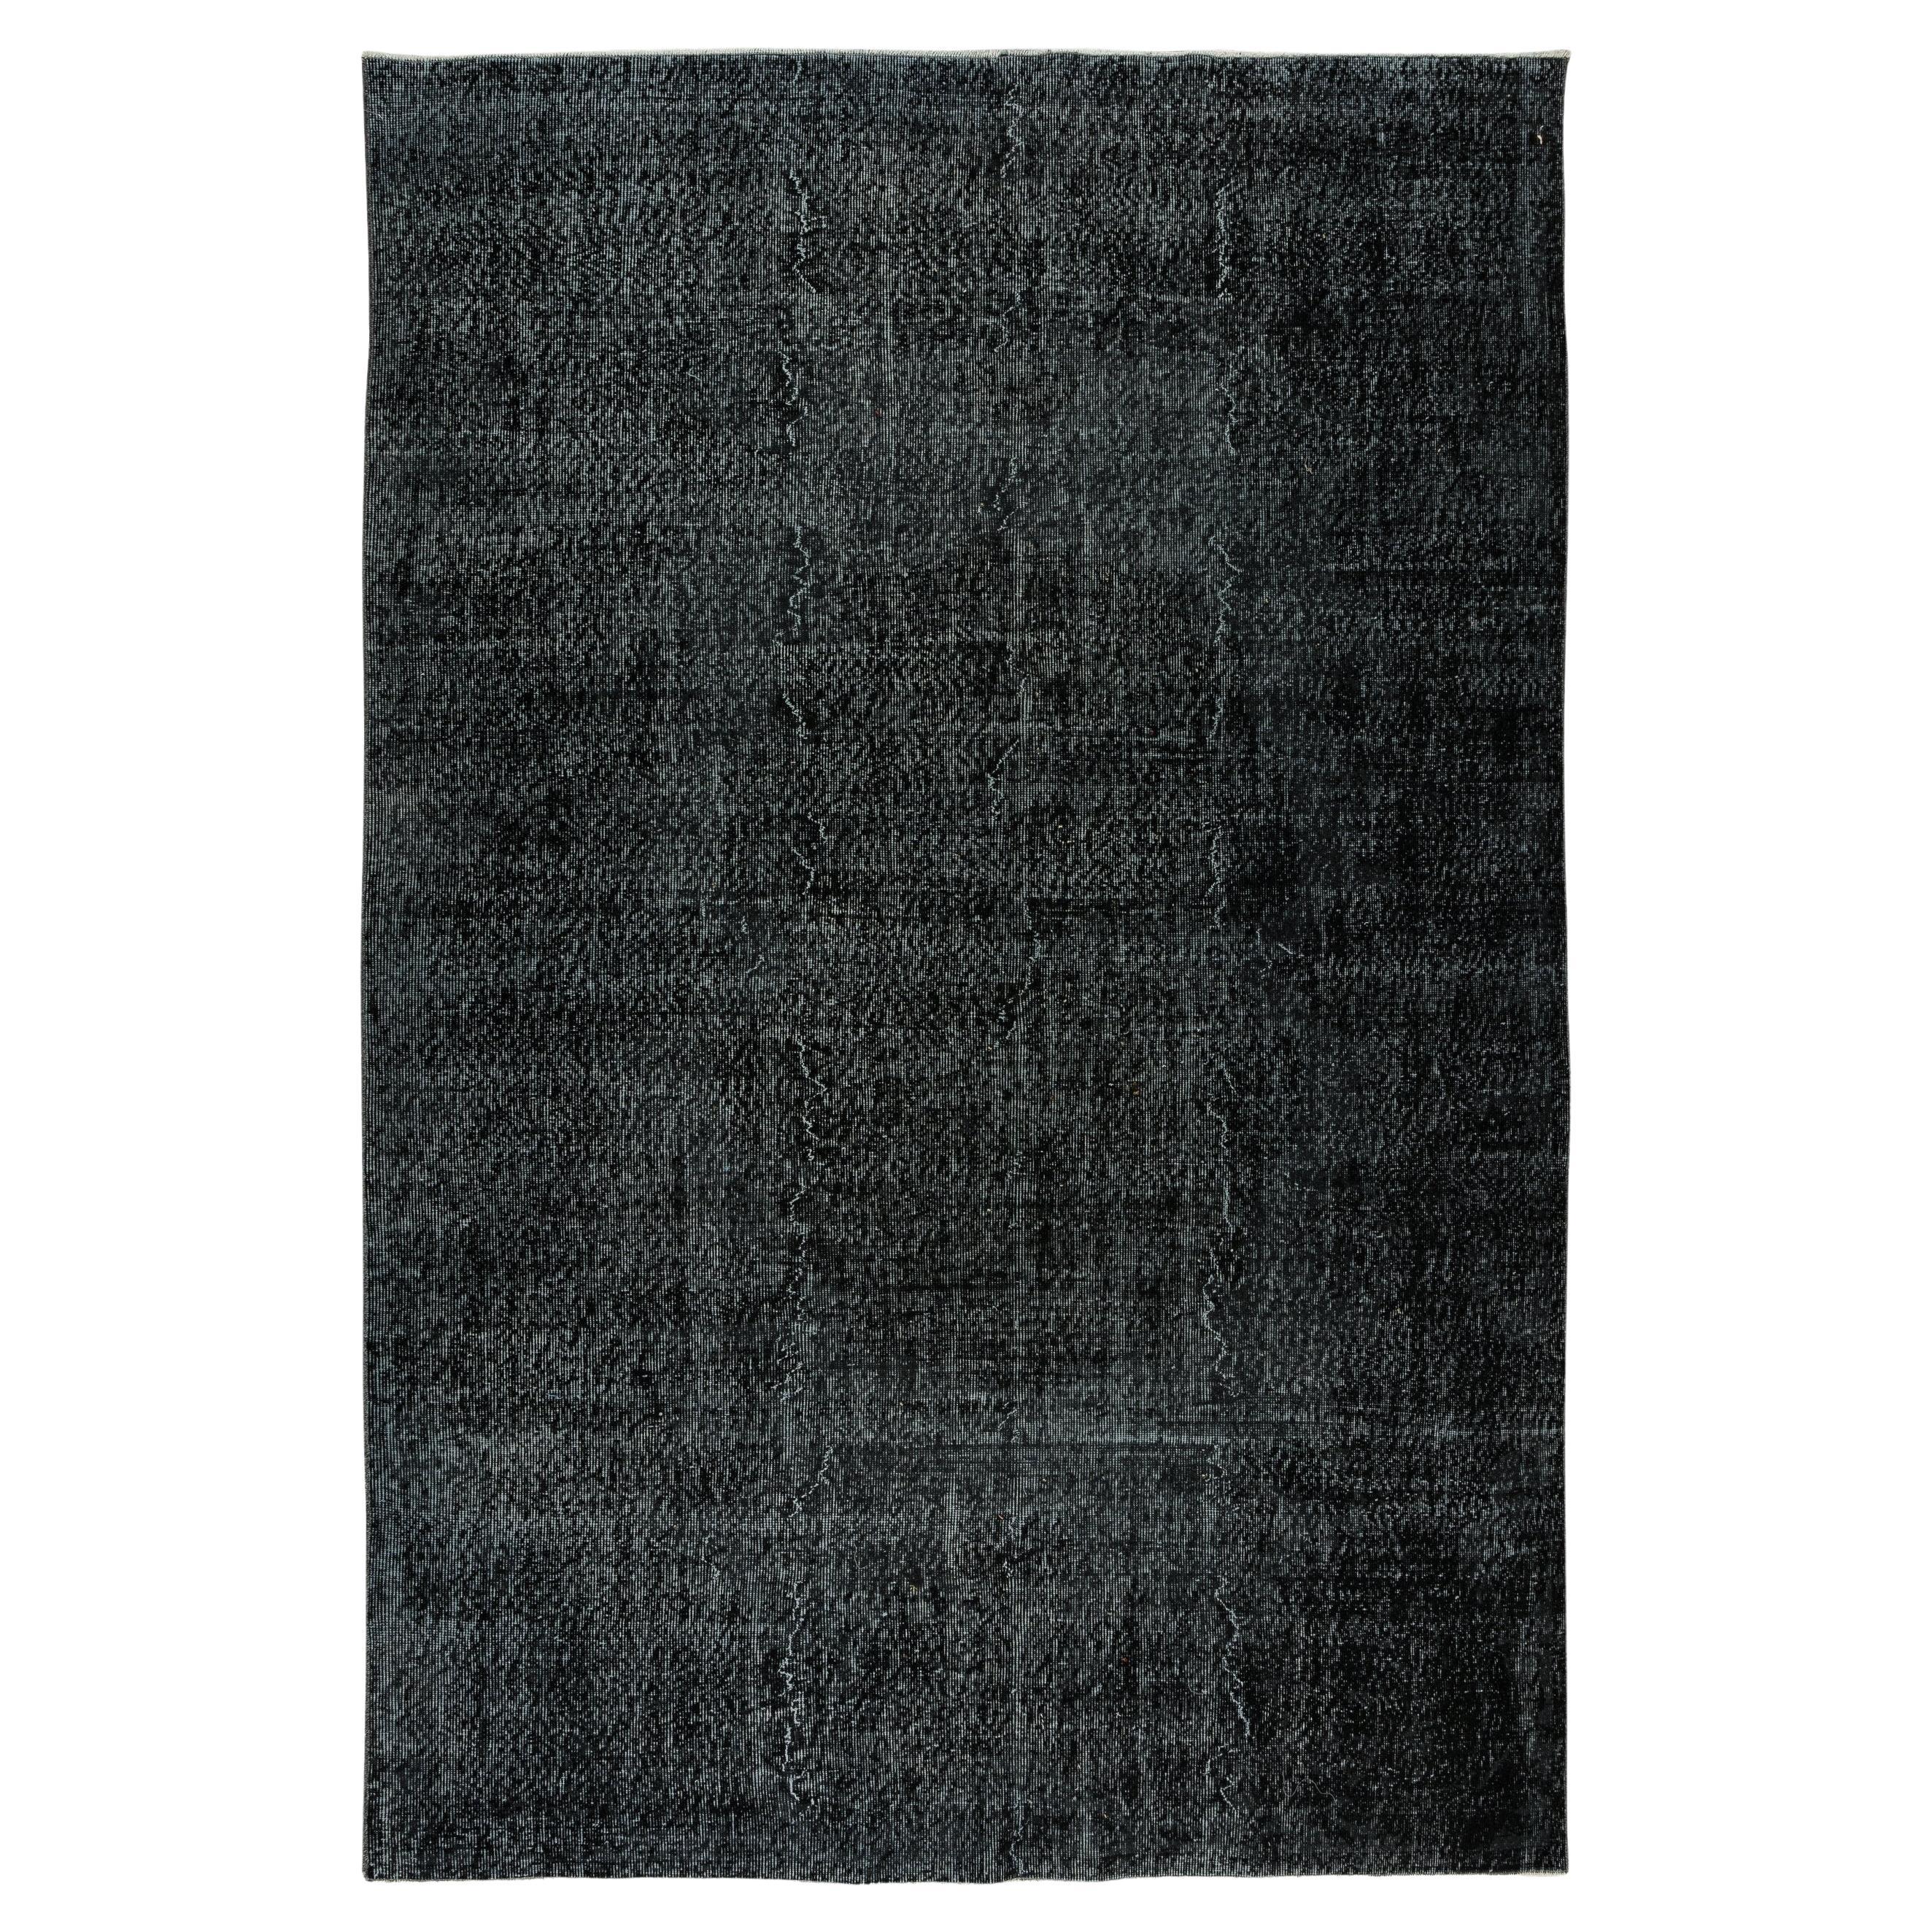 6.4x9.6 Ft Handmade Vintage Turkish Area Rug Re-Dyed in Black 4 Modern Interiors For Sale